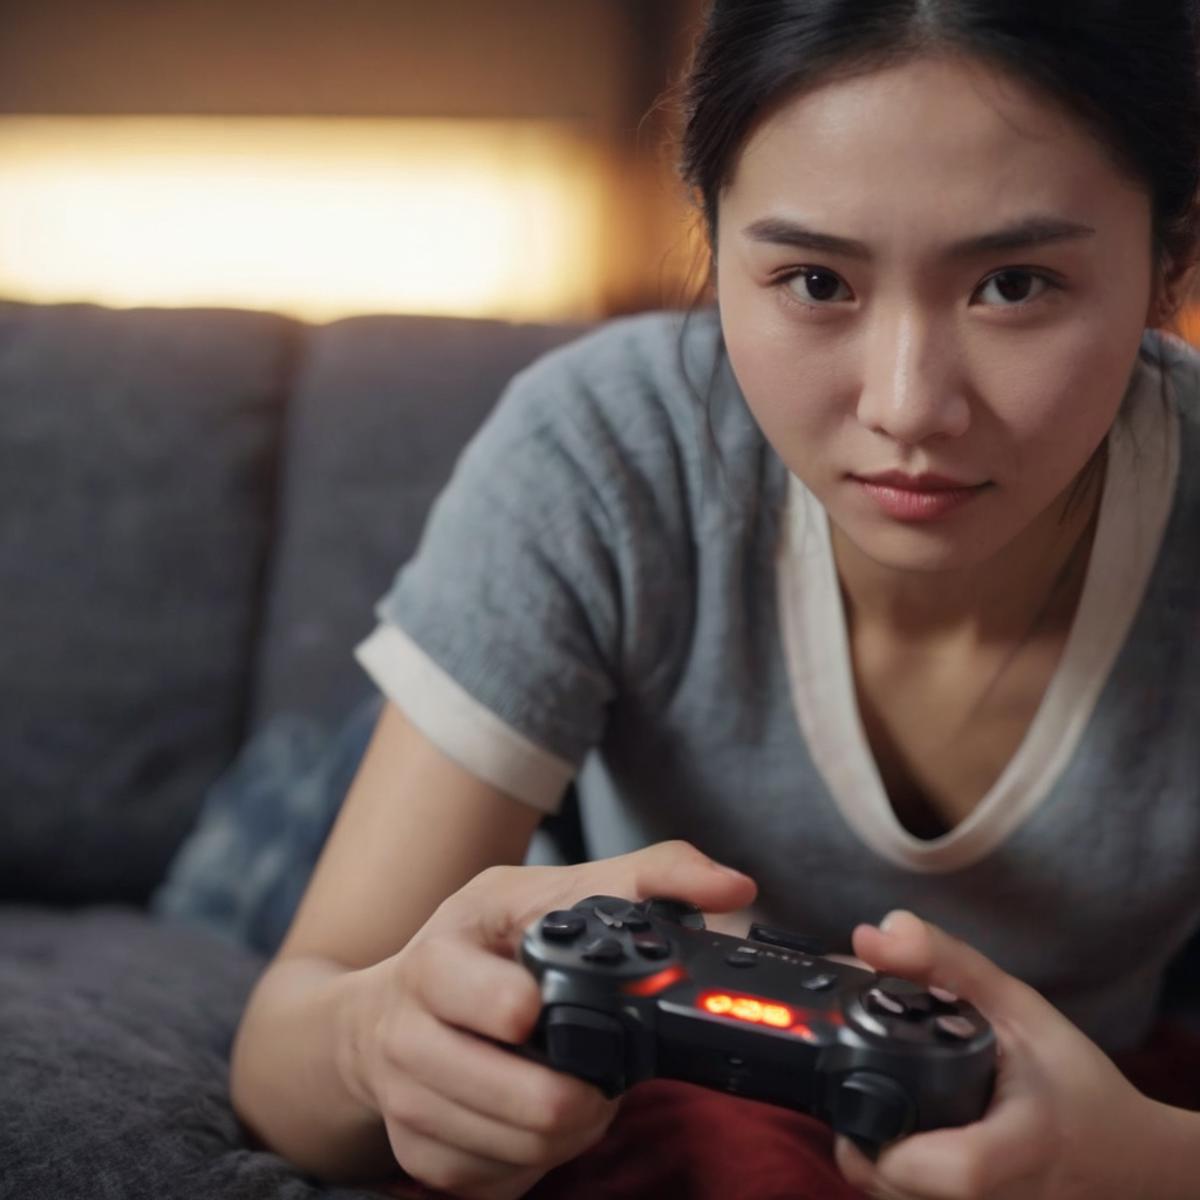 A woman playing a video game on a couch.